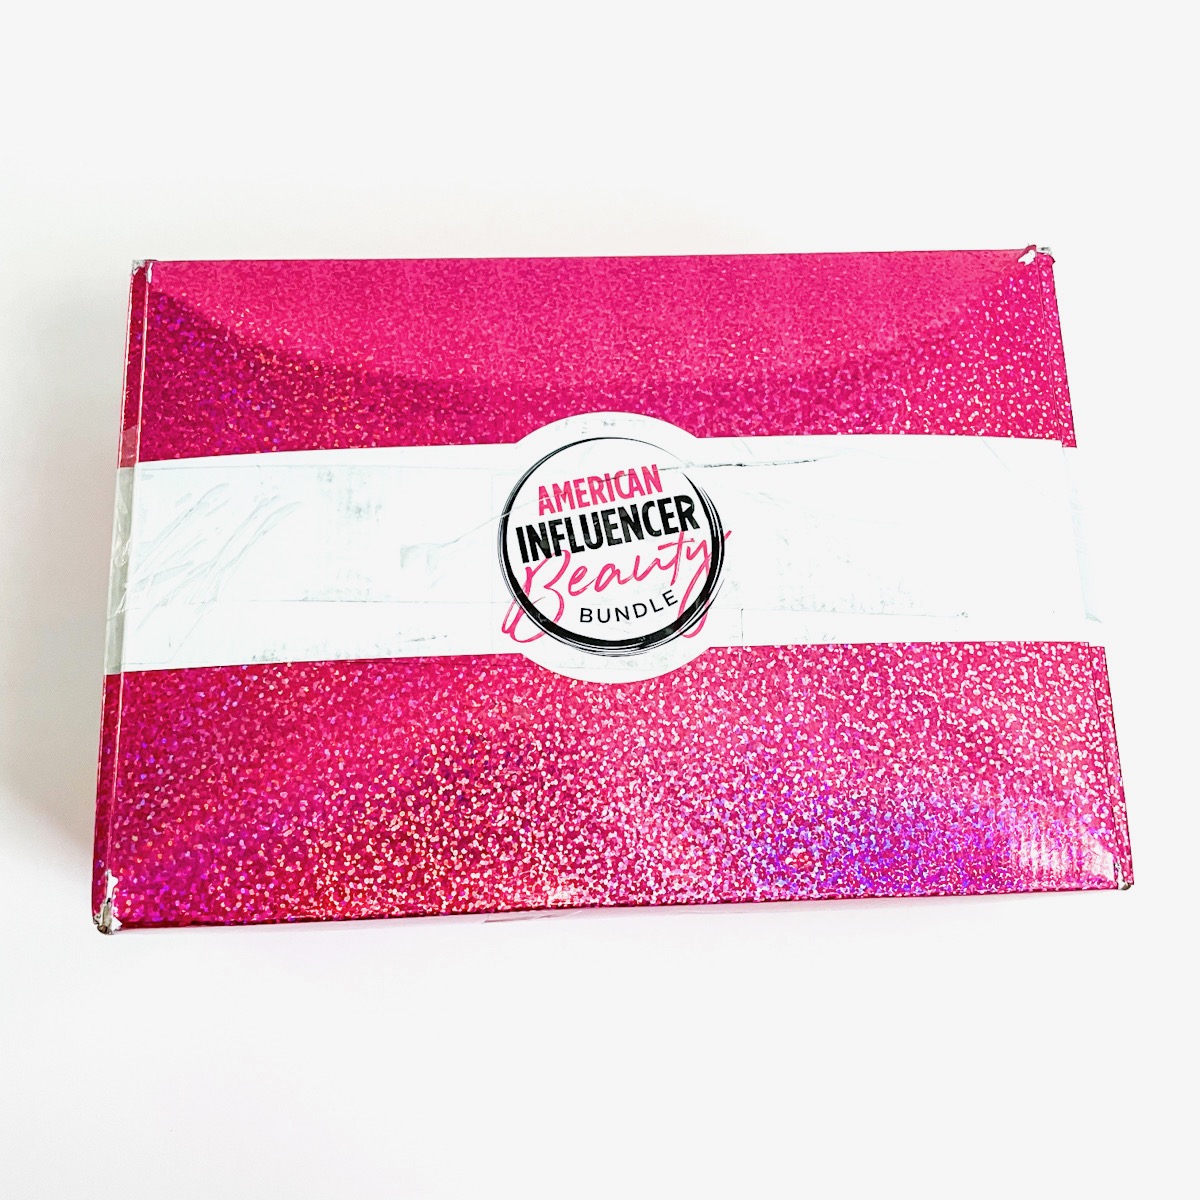 sparkly pink and white box on white background